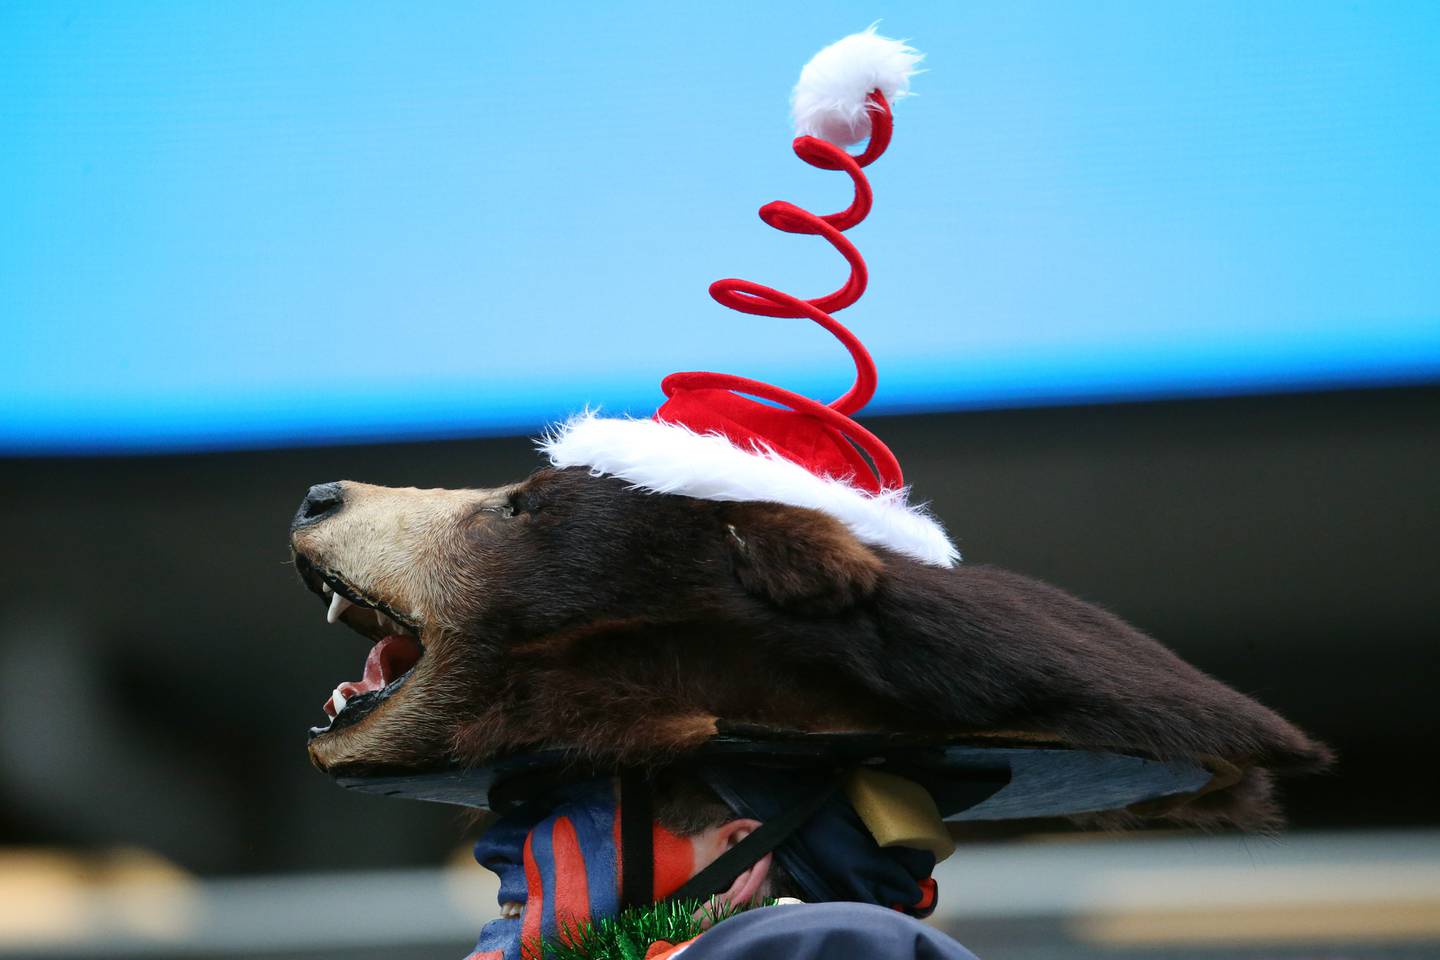 A fan in the Christmas spirit at Soldier Field.